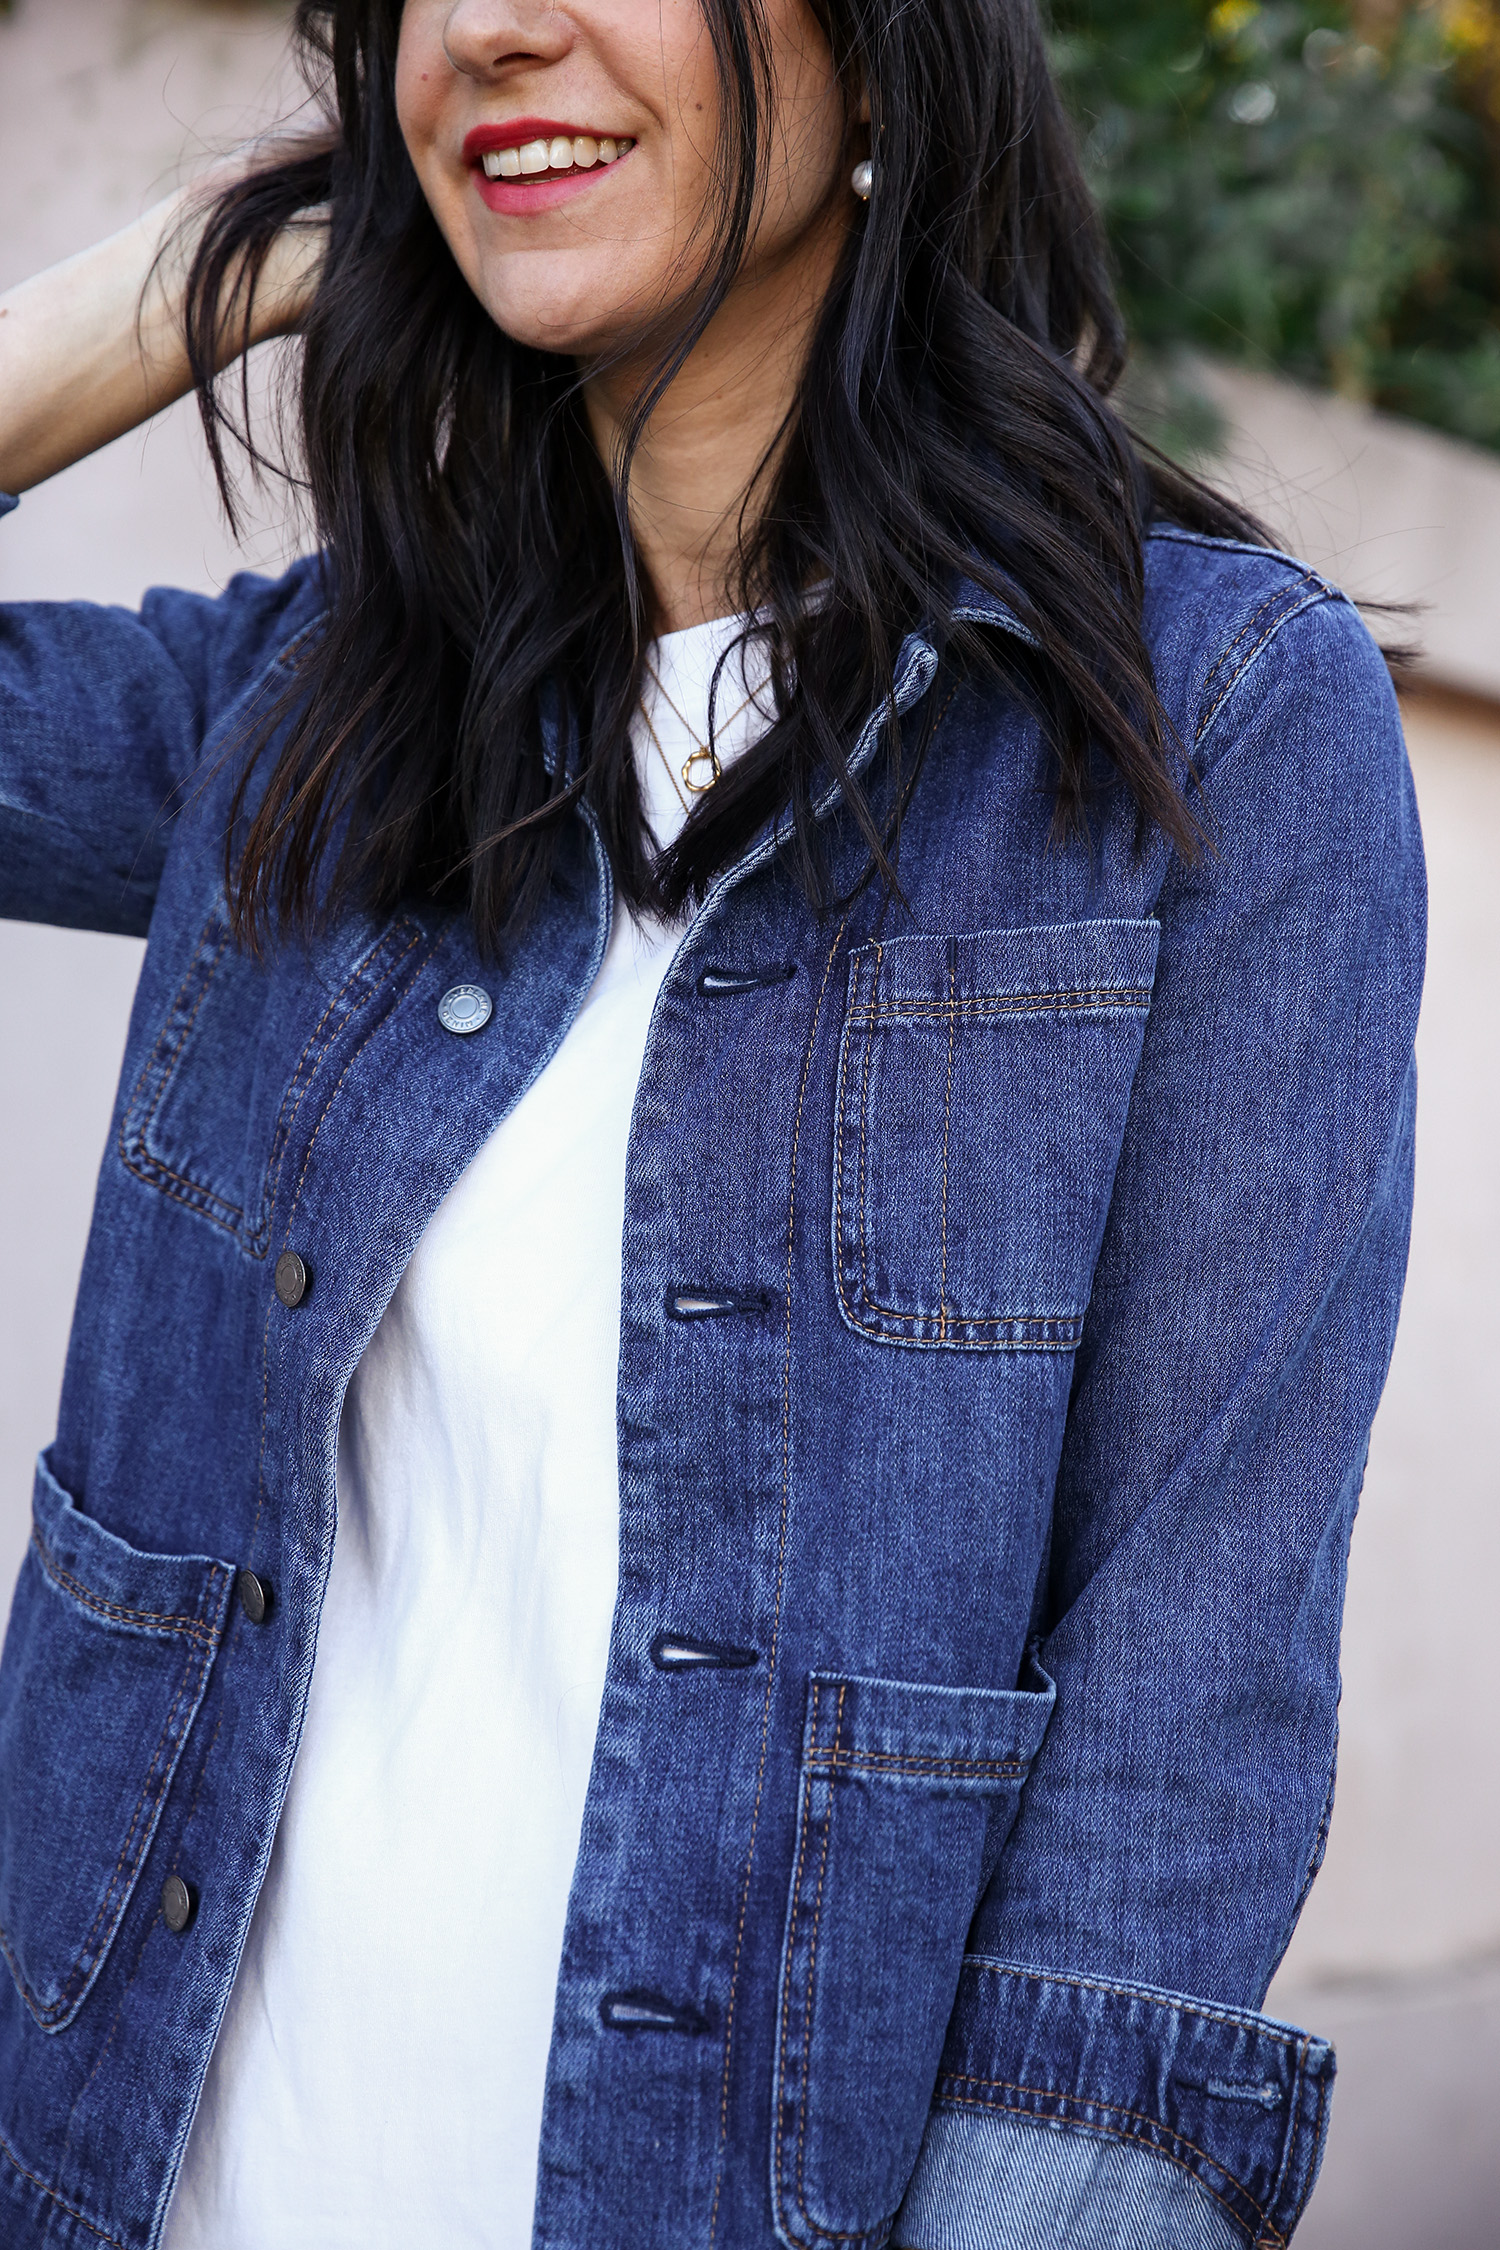 Three reasons why you need a denim jacket in your wardrobe